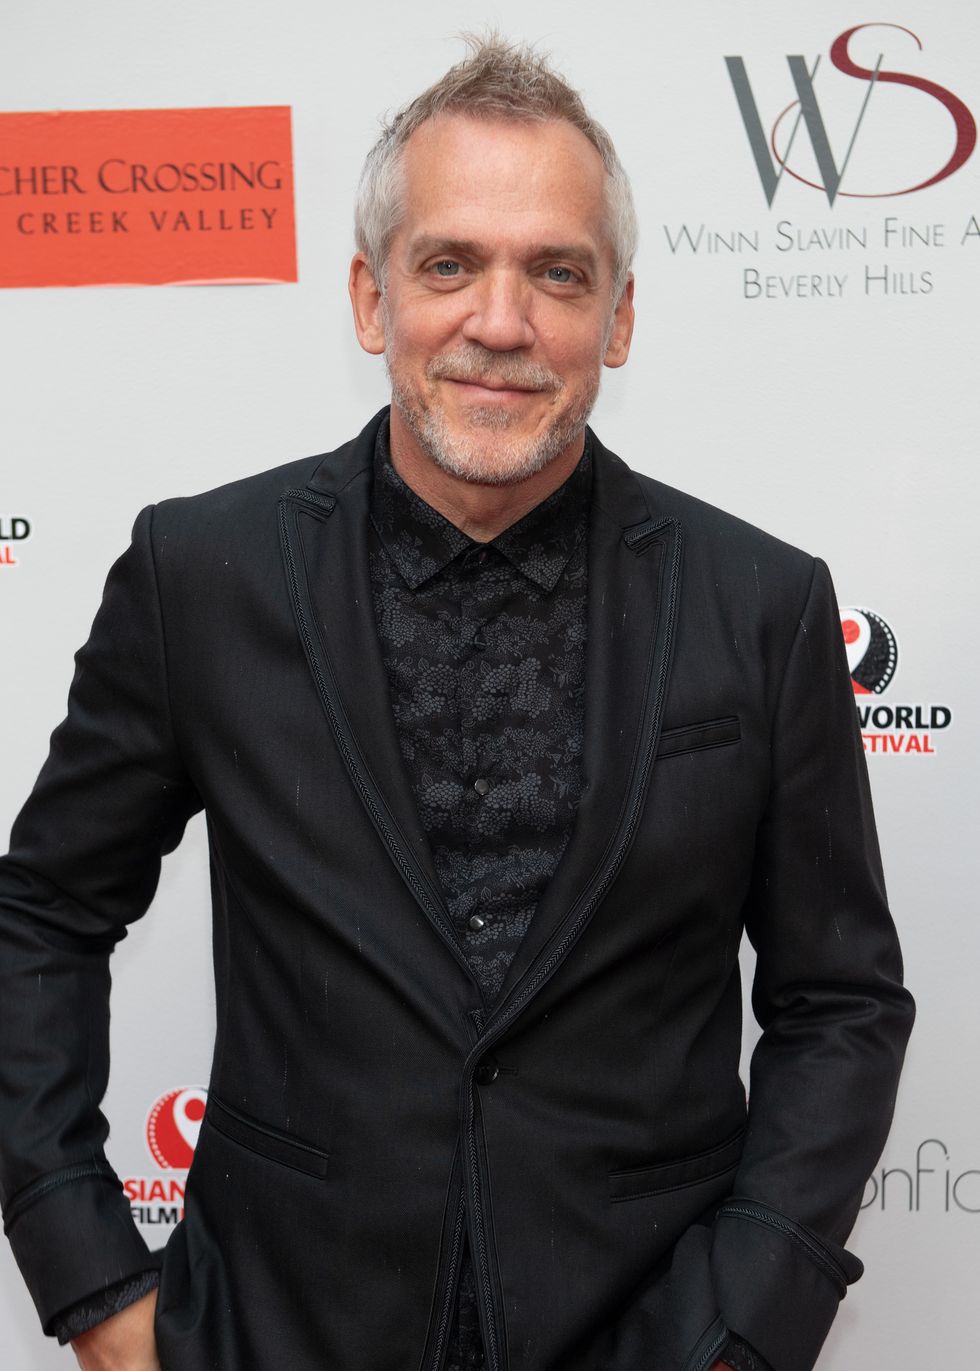 director jean marc vallee arrives at master sculptor sir daniel winn unveils statuettes for asian world film festival on june 19, 2021 in beverly hills, california